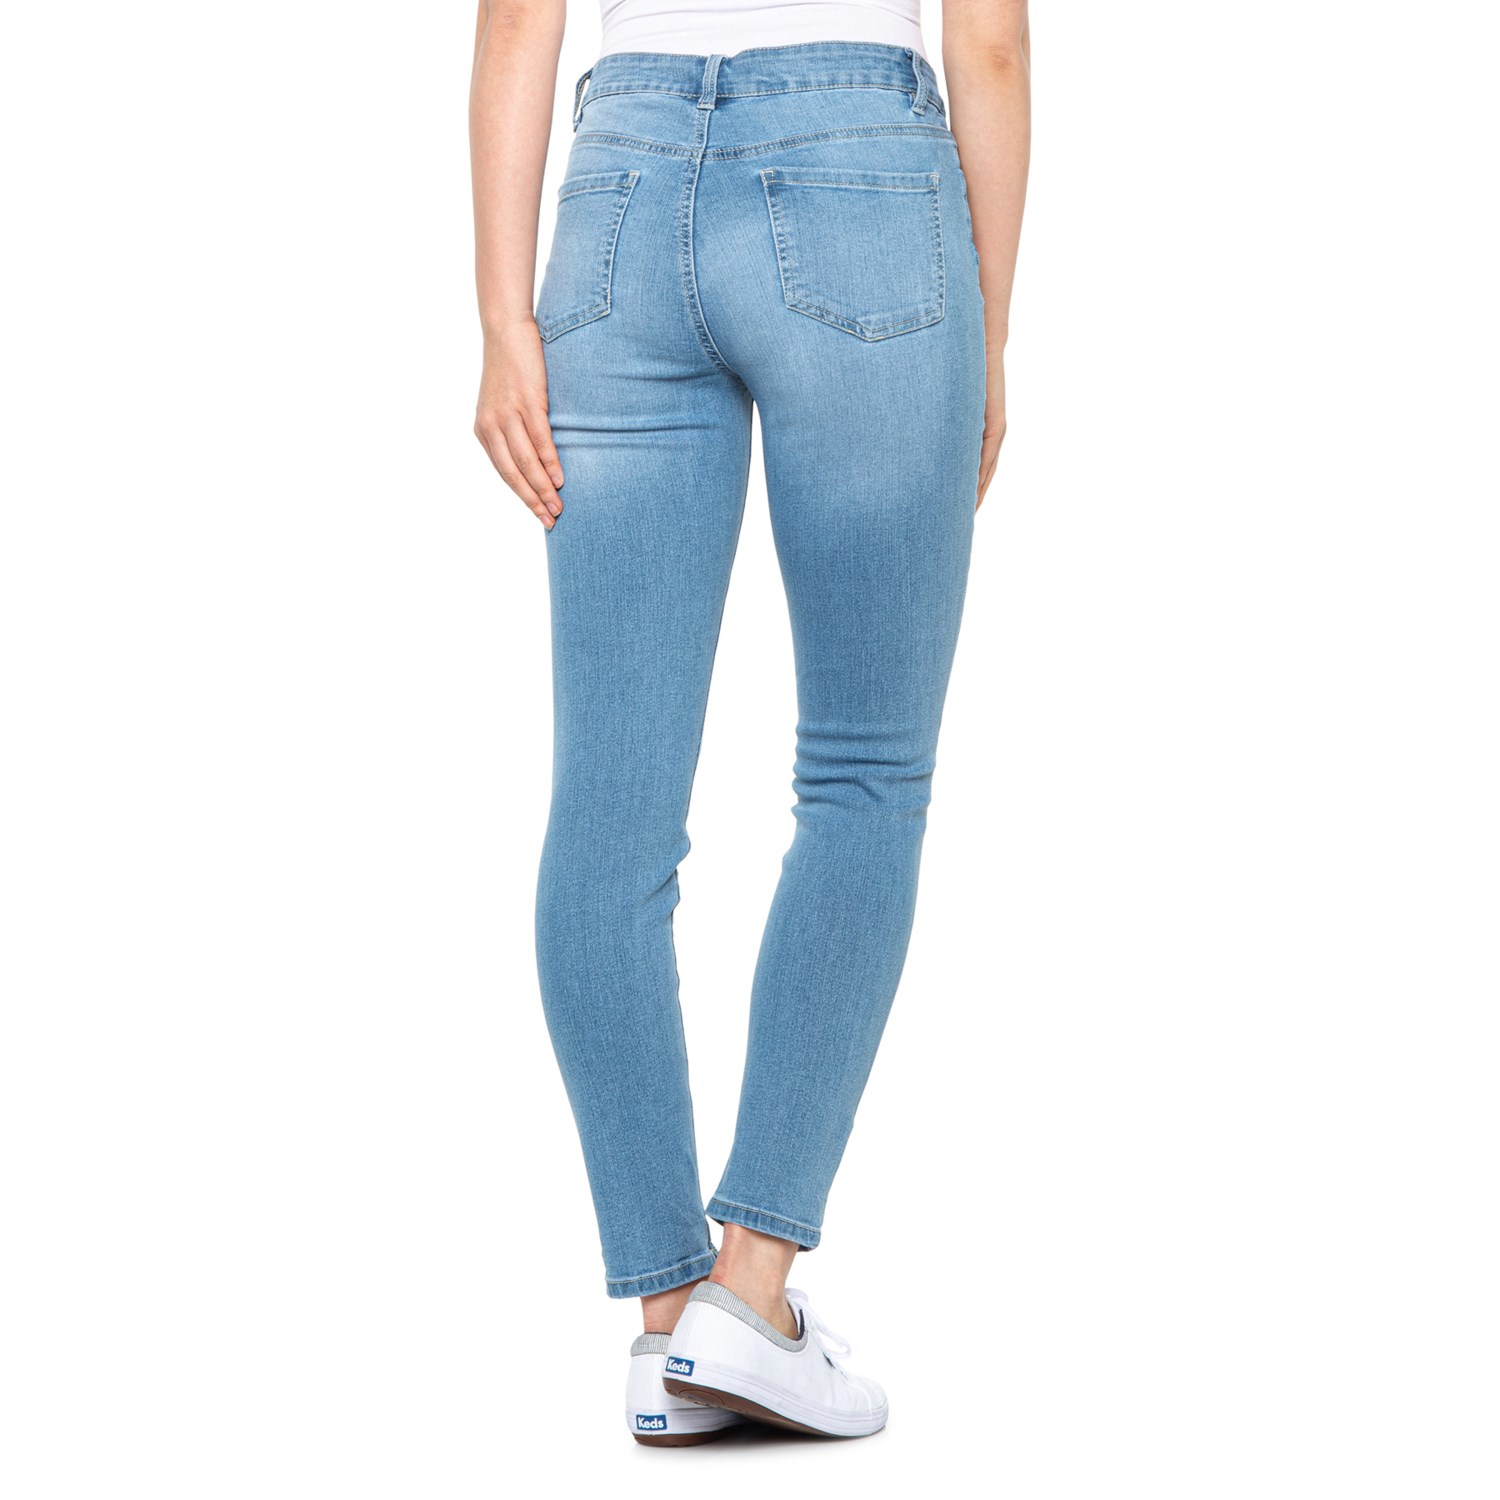 D. Jeans Sage Repreve® Skinny Ankle Jeans (For Women) - Save 60%